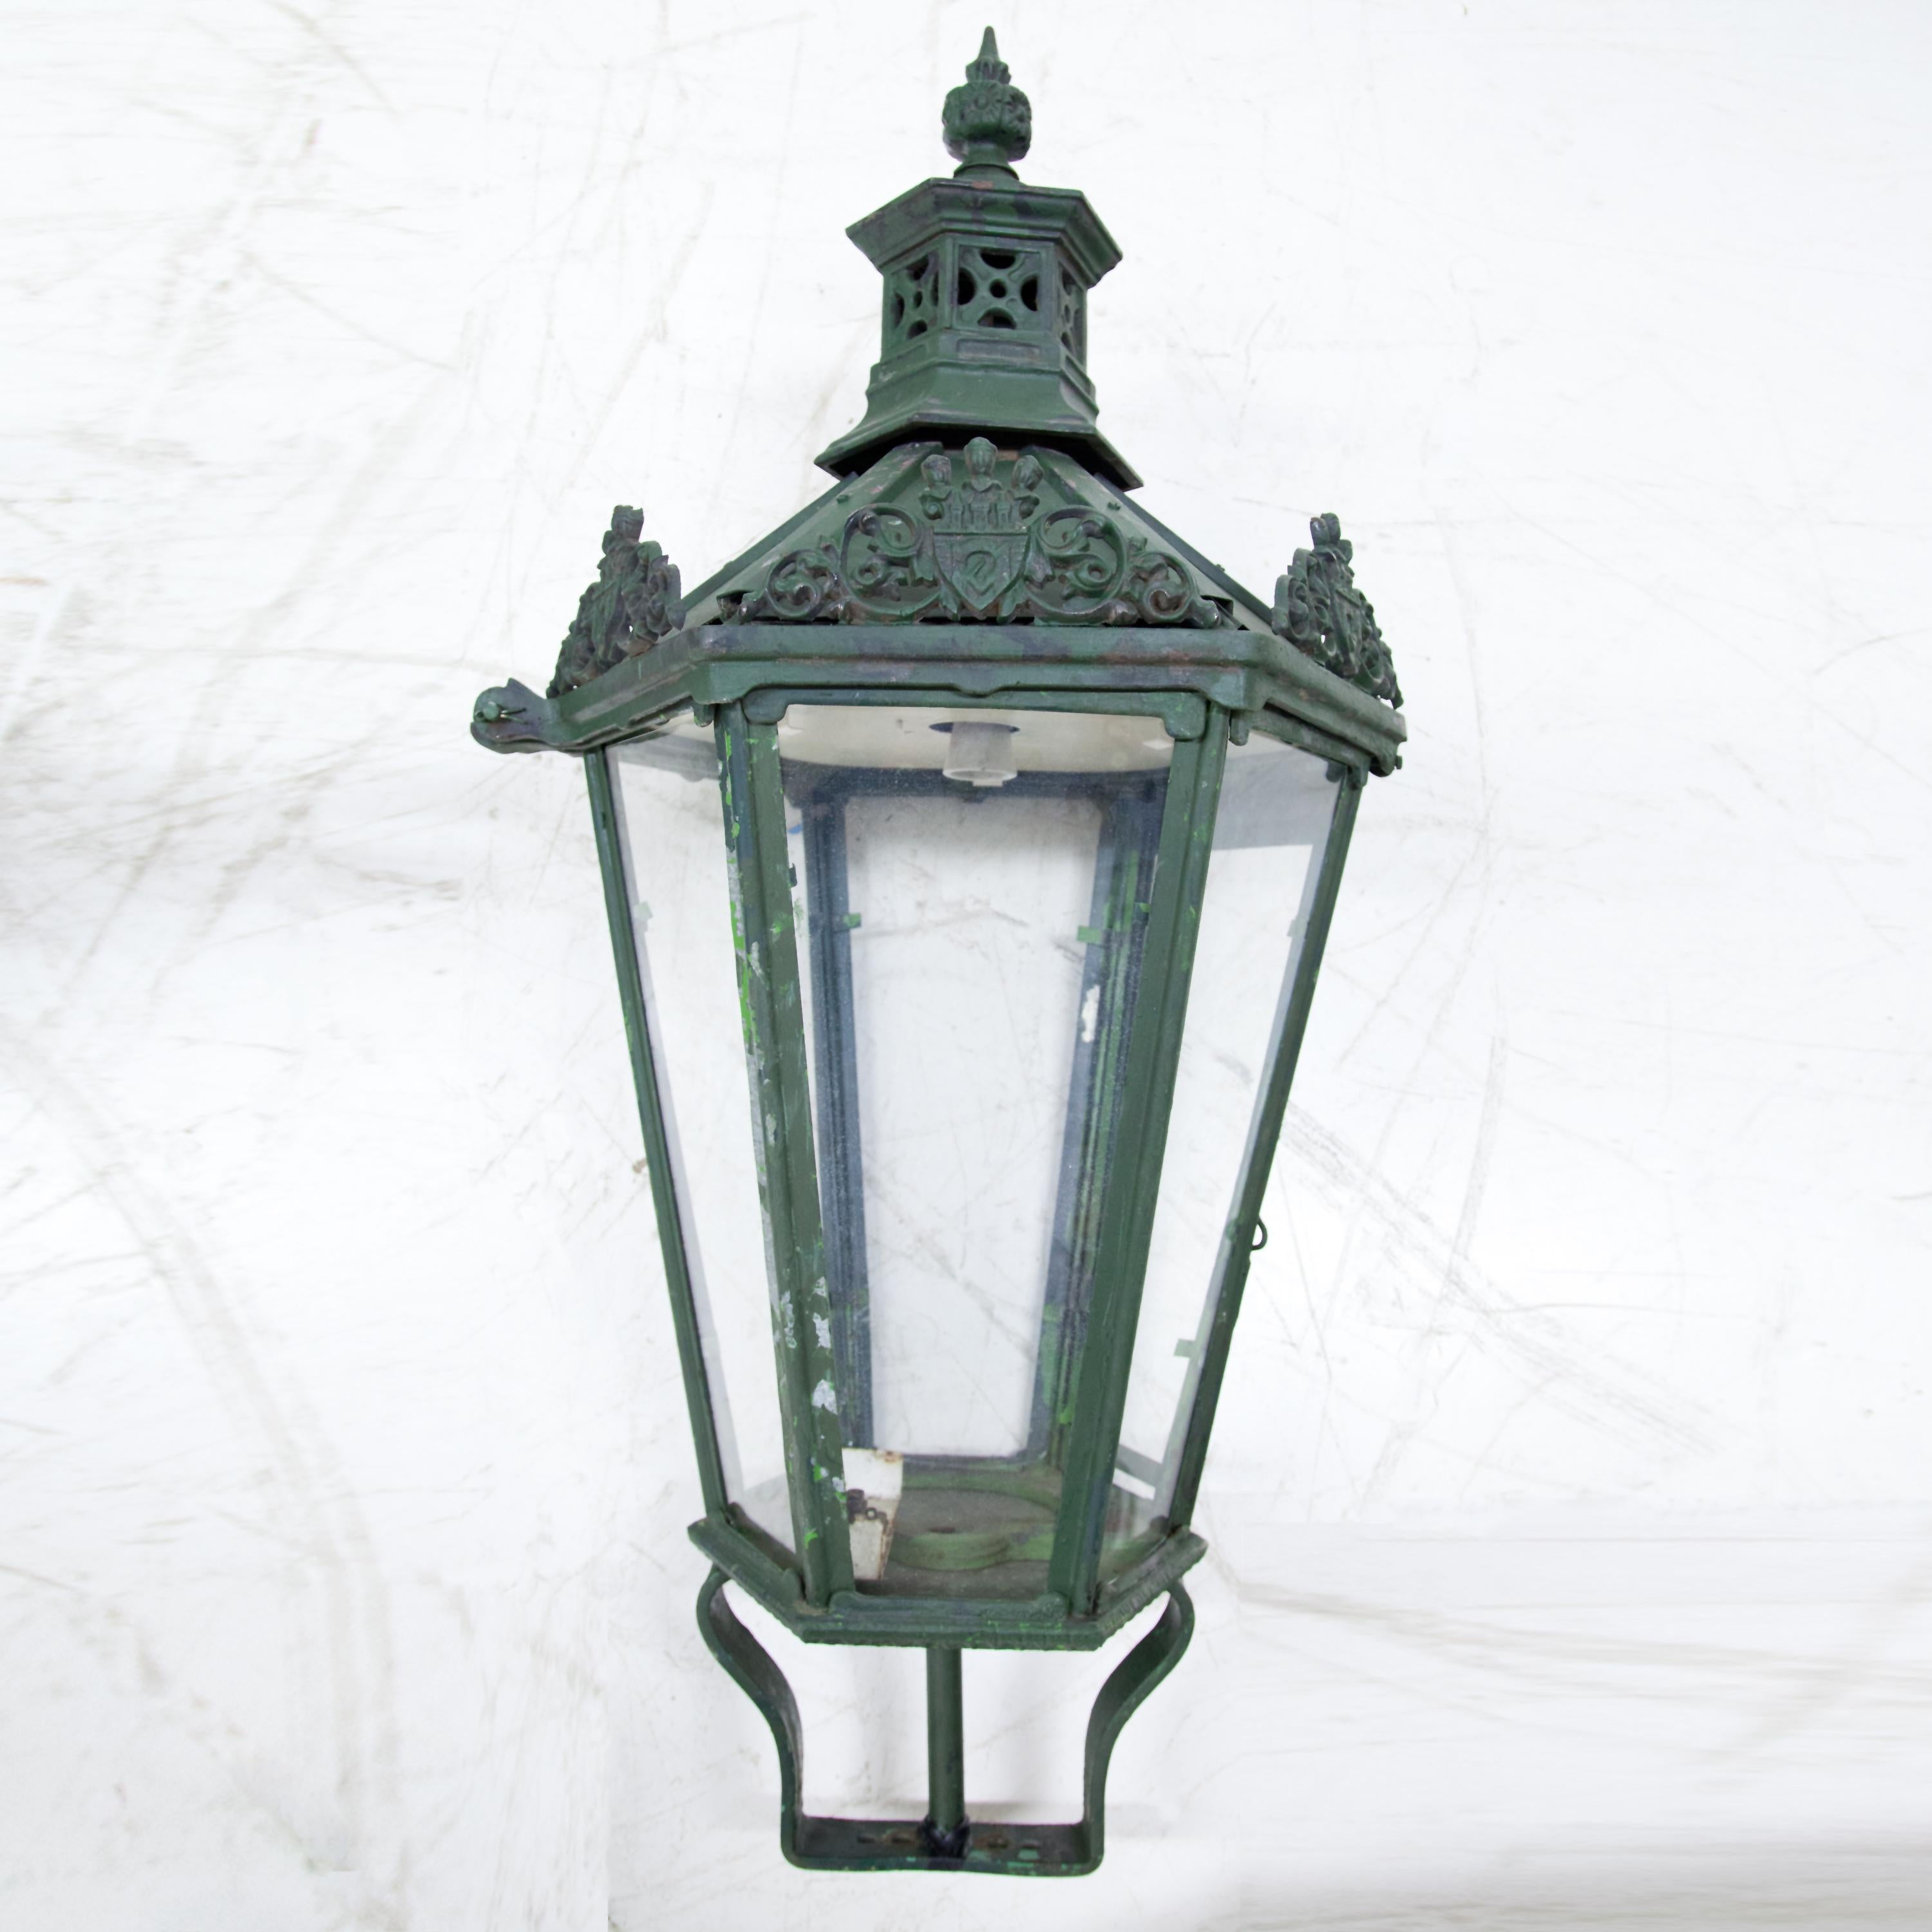 Pair of cast iron lanterns with hexagonal, glazed body and city coat of arms of Prague as decoration. Green patina.